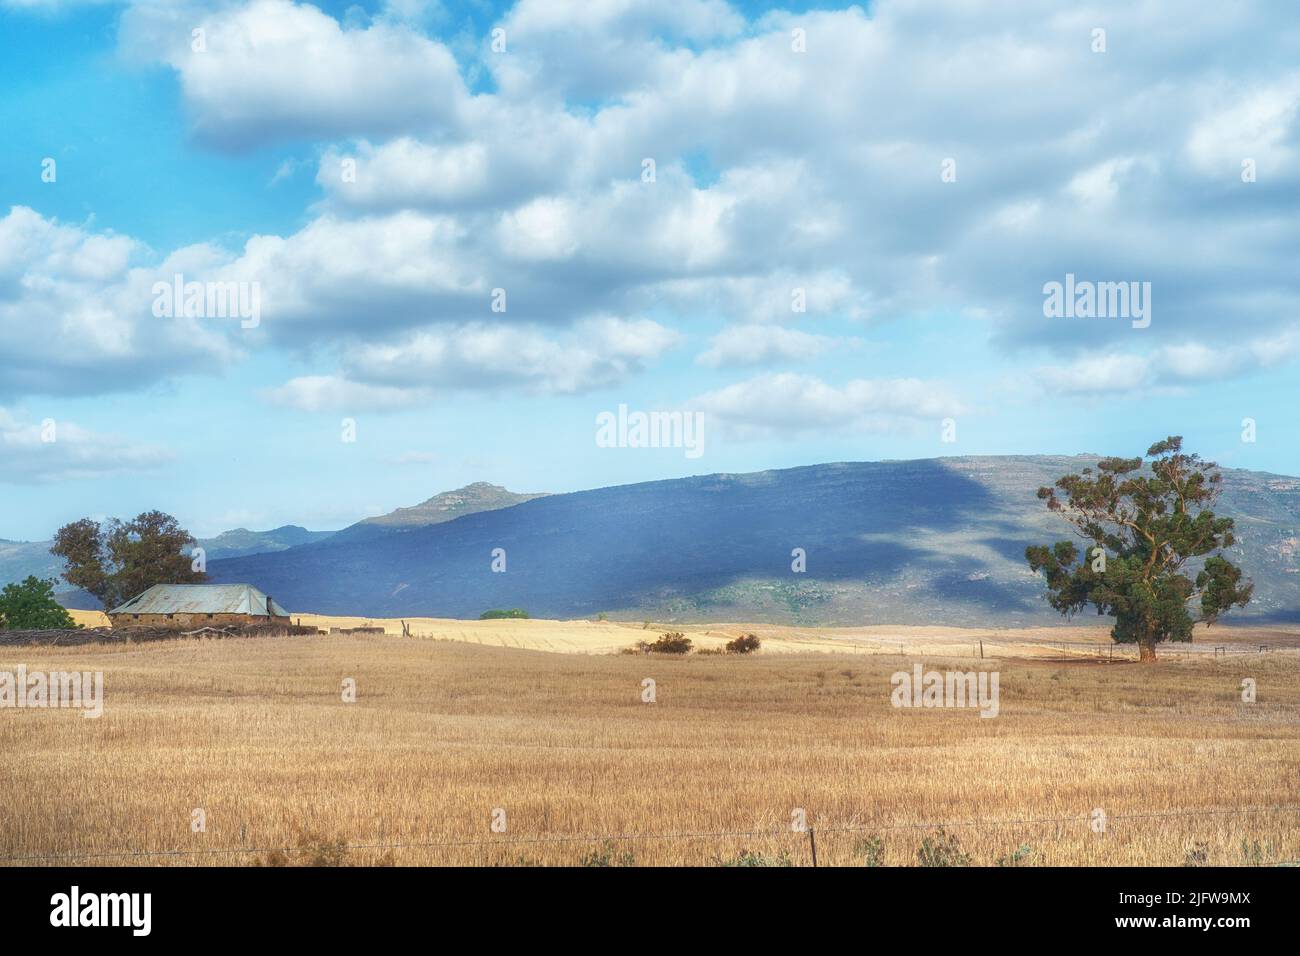 Copy space with scenic landscape of a golden wheat field and clouds in a blue sky background. Grain being cultivated for harvest on a sustainable farm Stock Photo